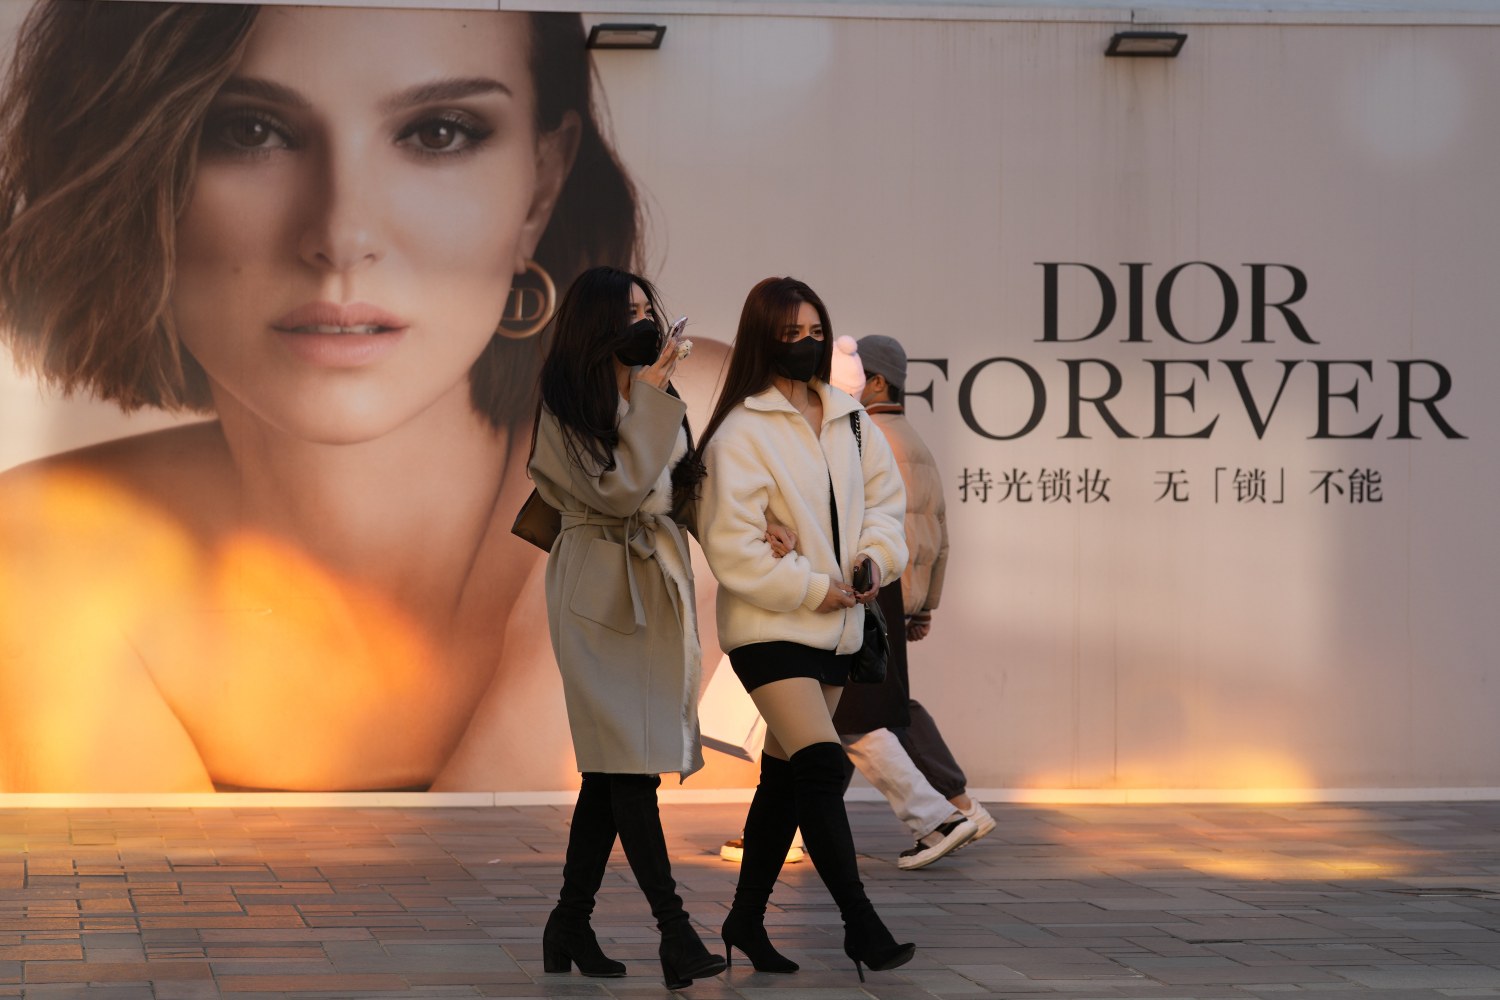 Dior draws ire in China with photo that 'smears Asian women